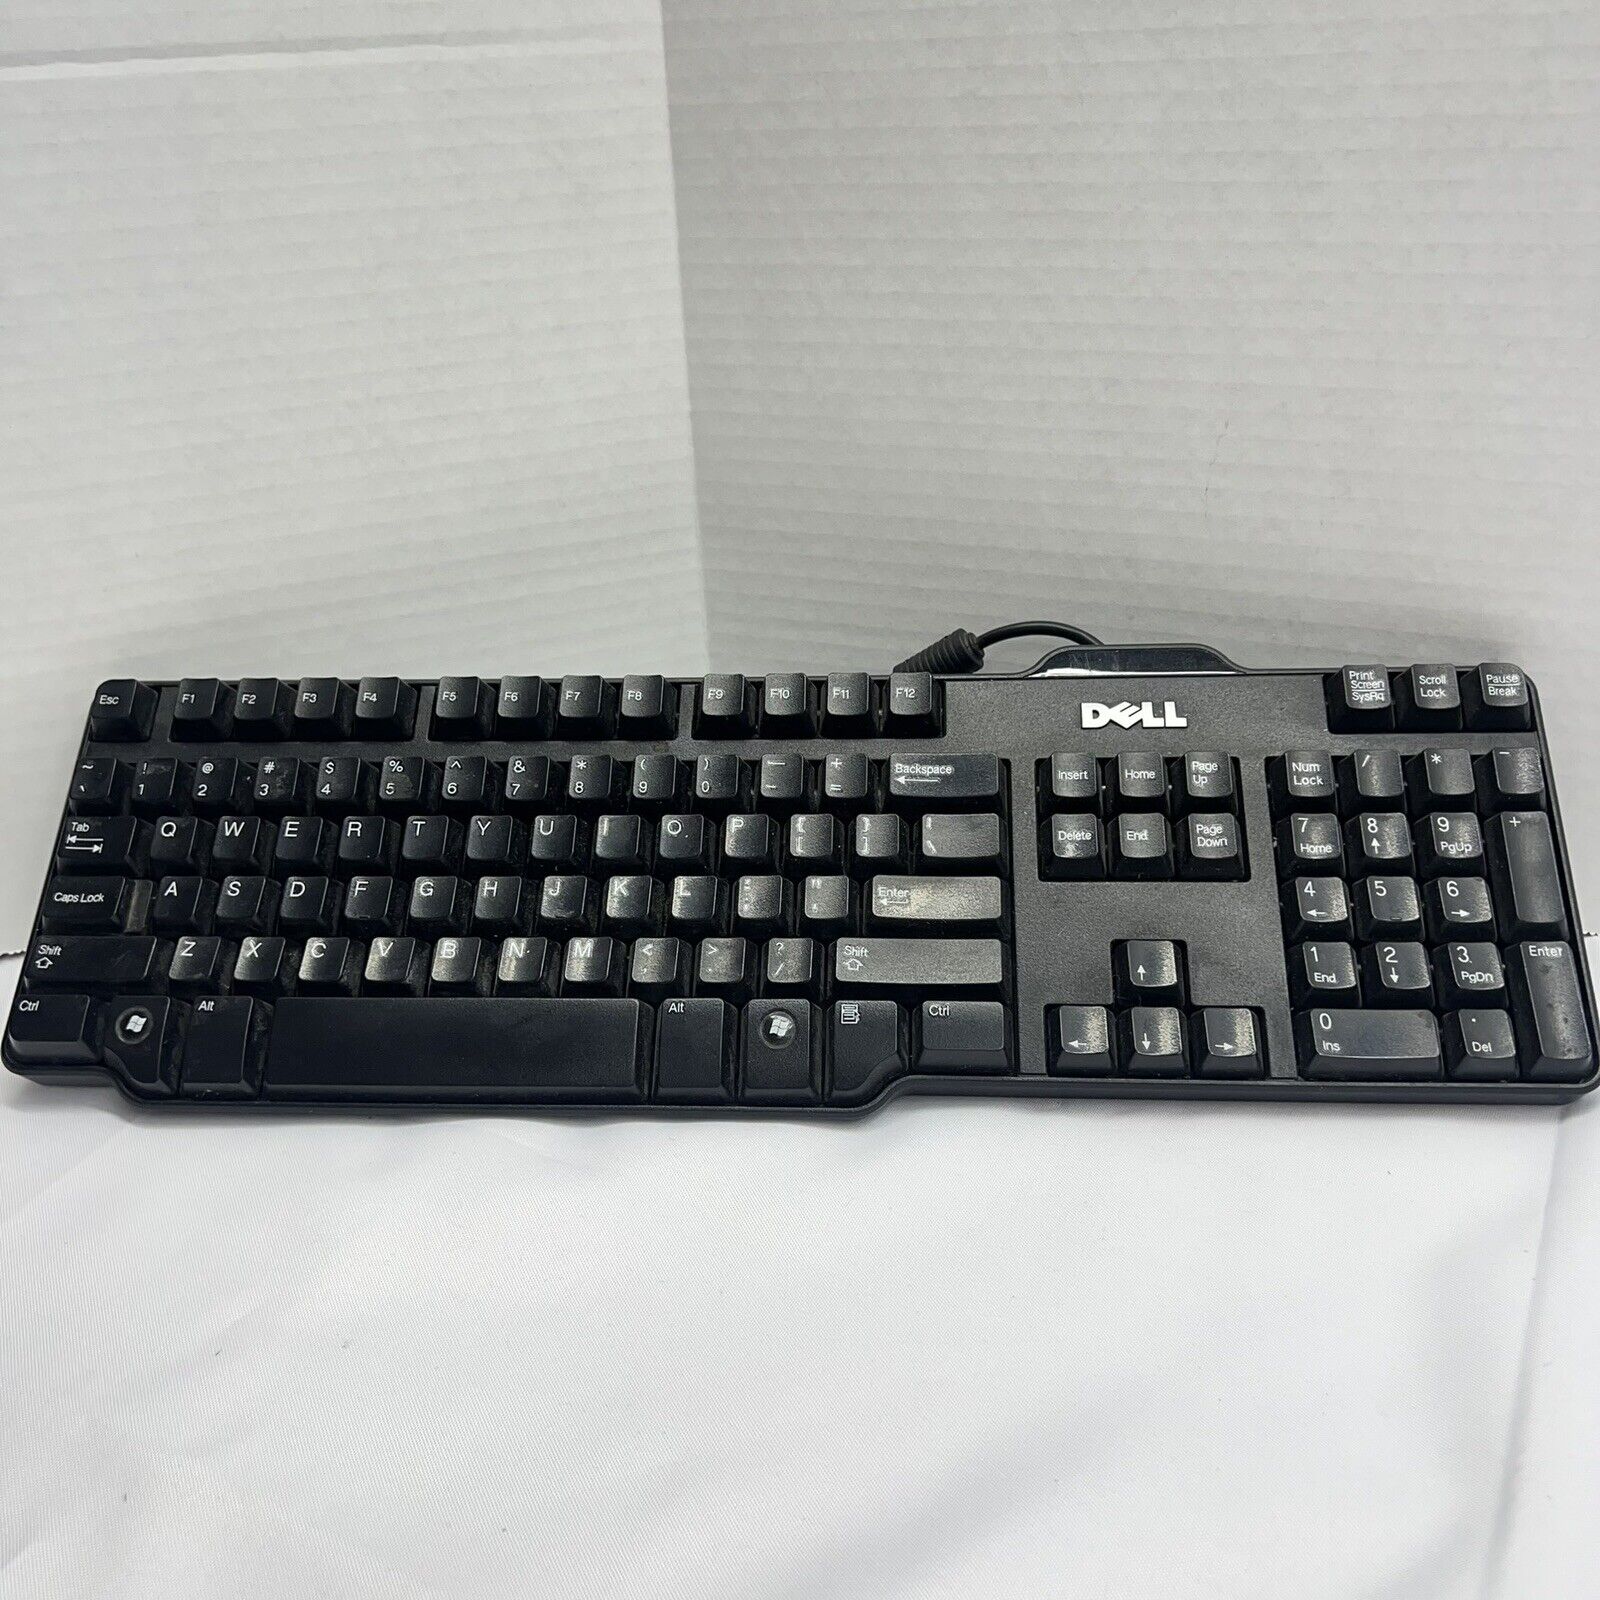 Genuine Dell L100/SK-8115 USB Wired Computer Keyboard Mechanical Black 0NM467